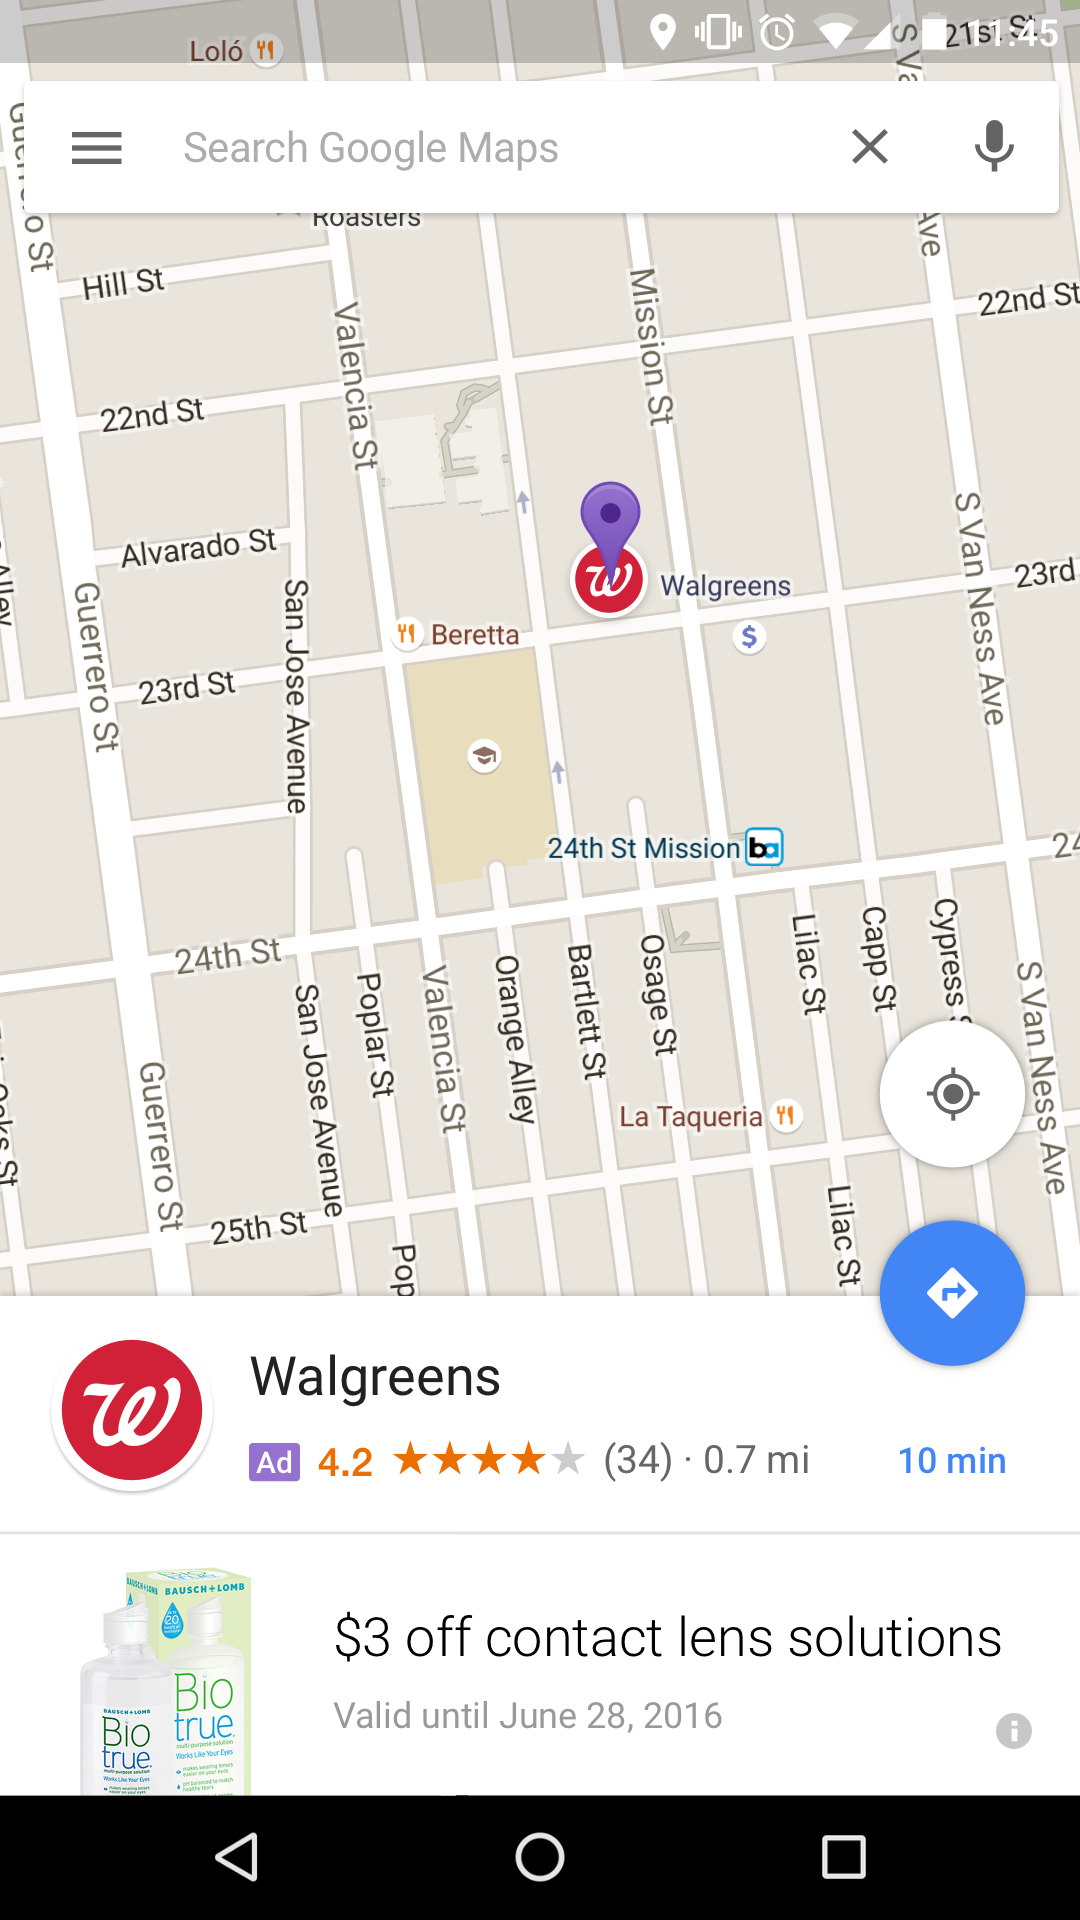 Google s "promoted pin" ads on its Maps app